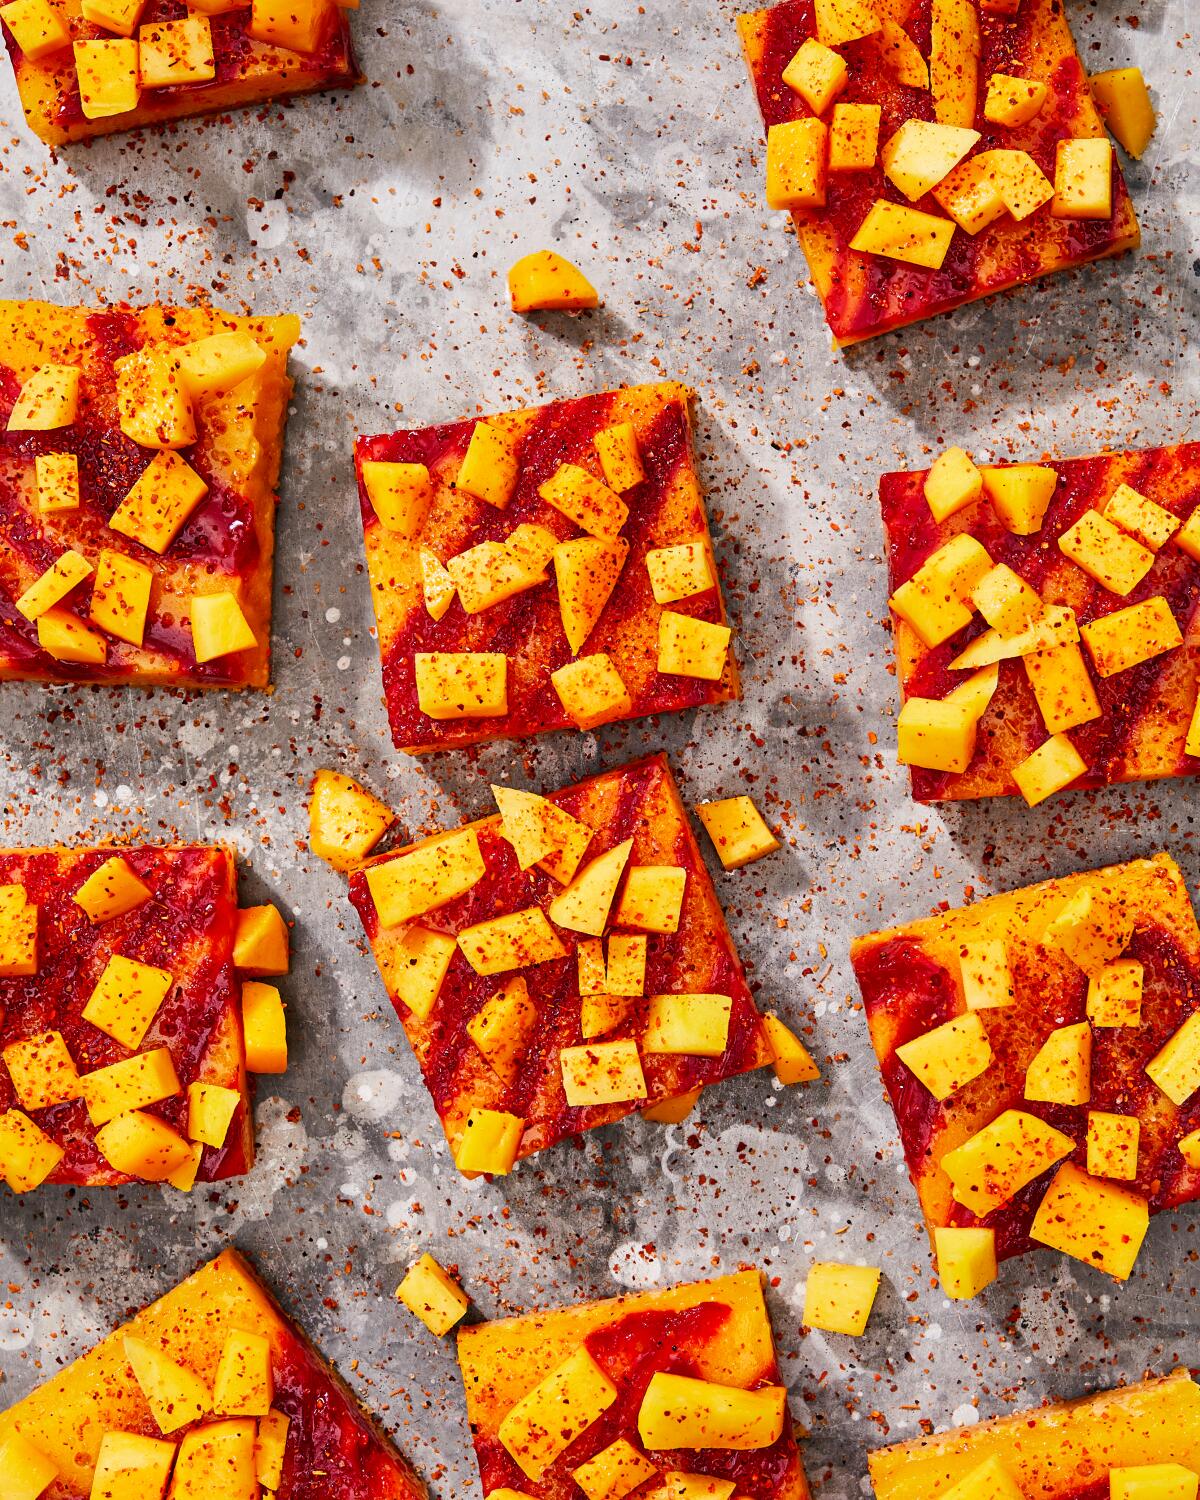 Floral mango, spicy-sour chamoy sauce, and salty Tajin combine to make the perfect pie bars for summer. Prop styling by Nidia Cueva.